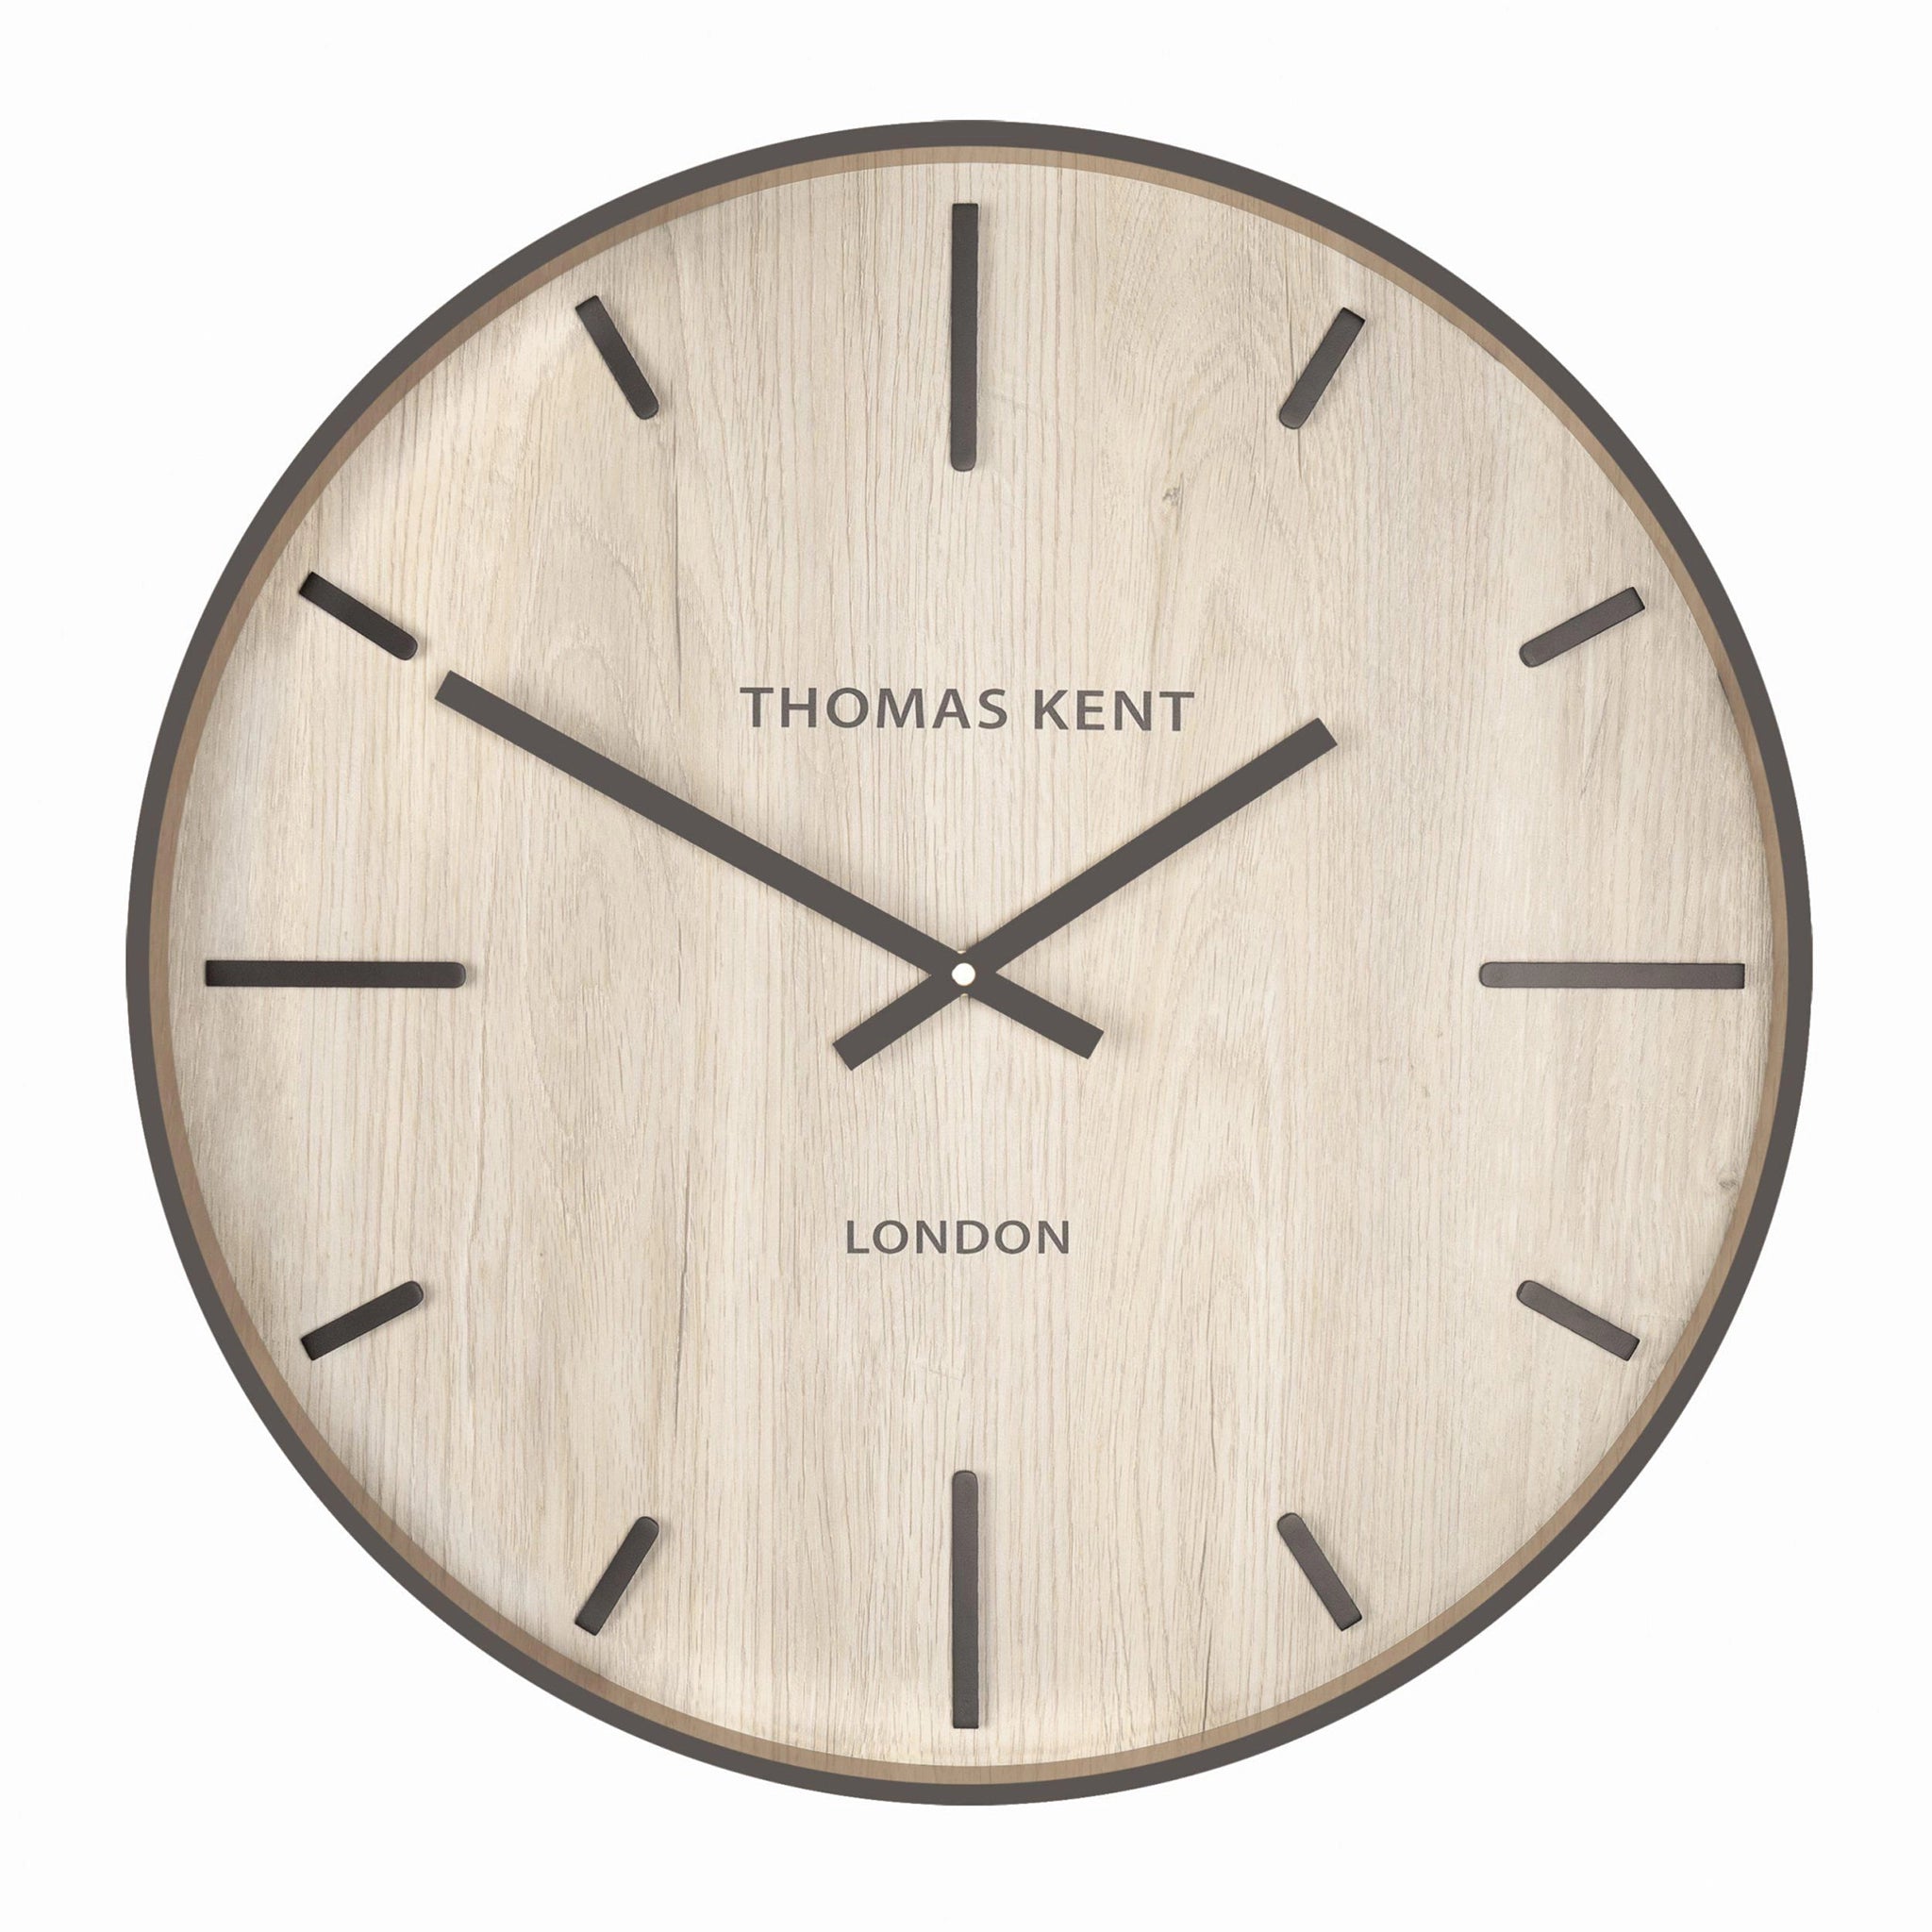 A wall clock with light wood effect face and simple number markings and hands